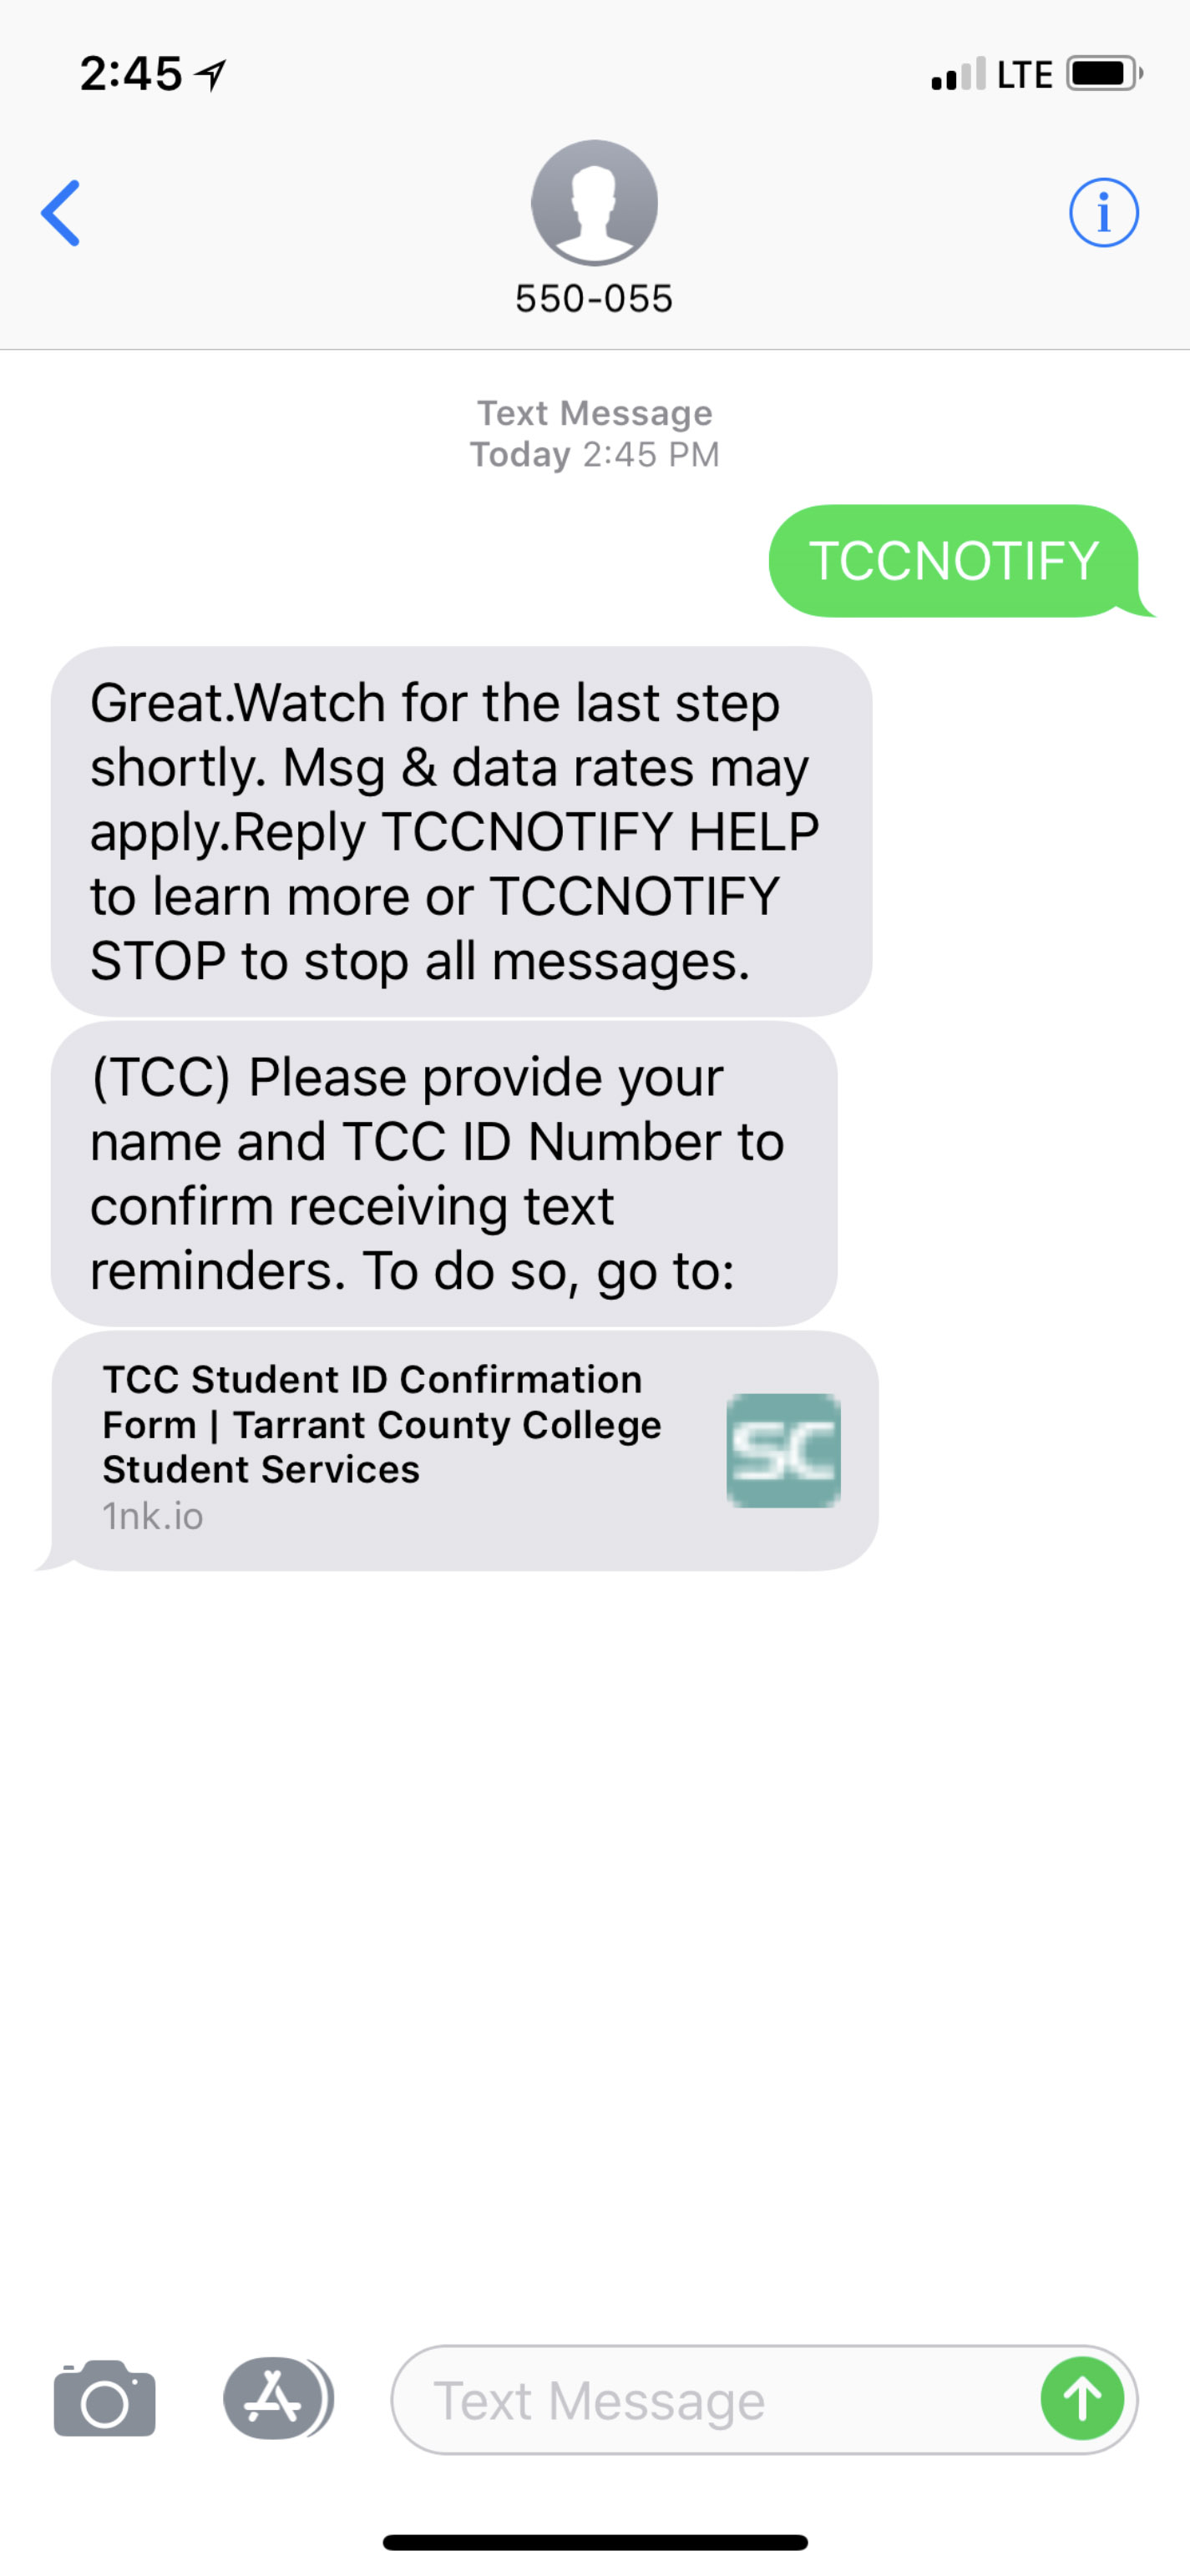 TCC students can text "tccnotify" to 550-055 to sign up for text message alerts.